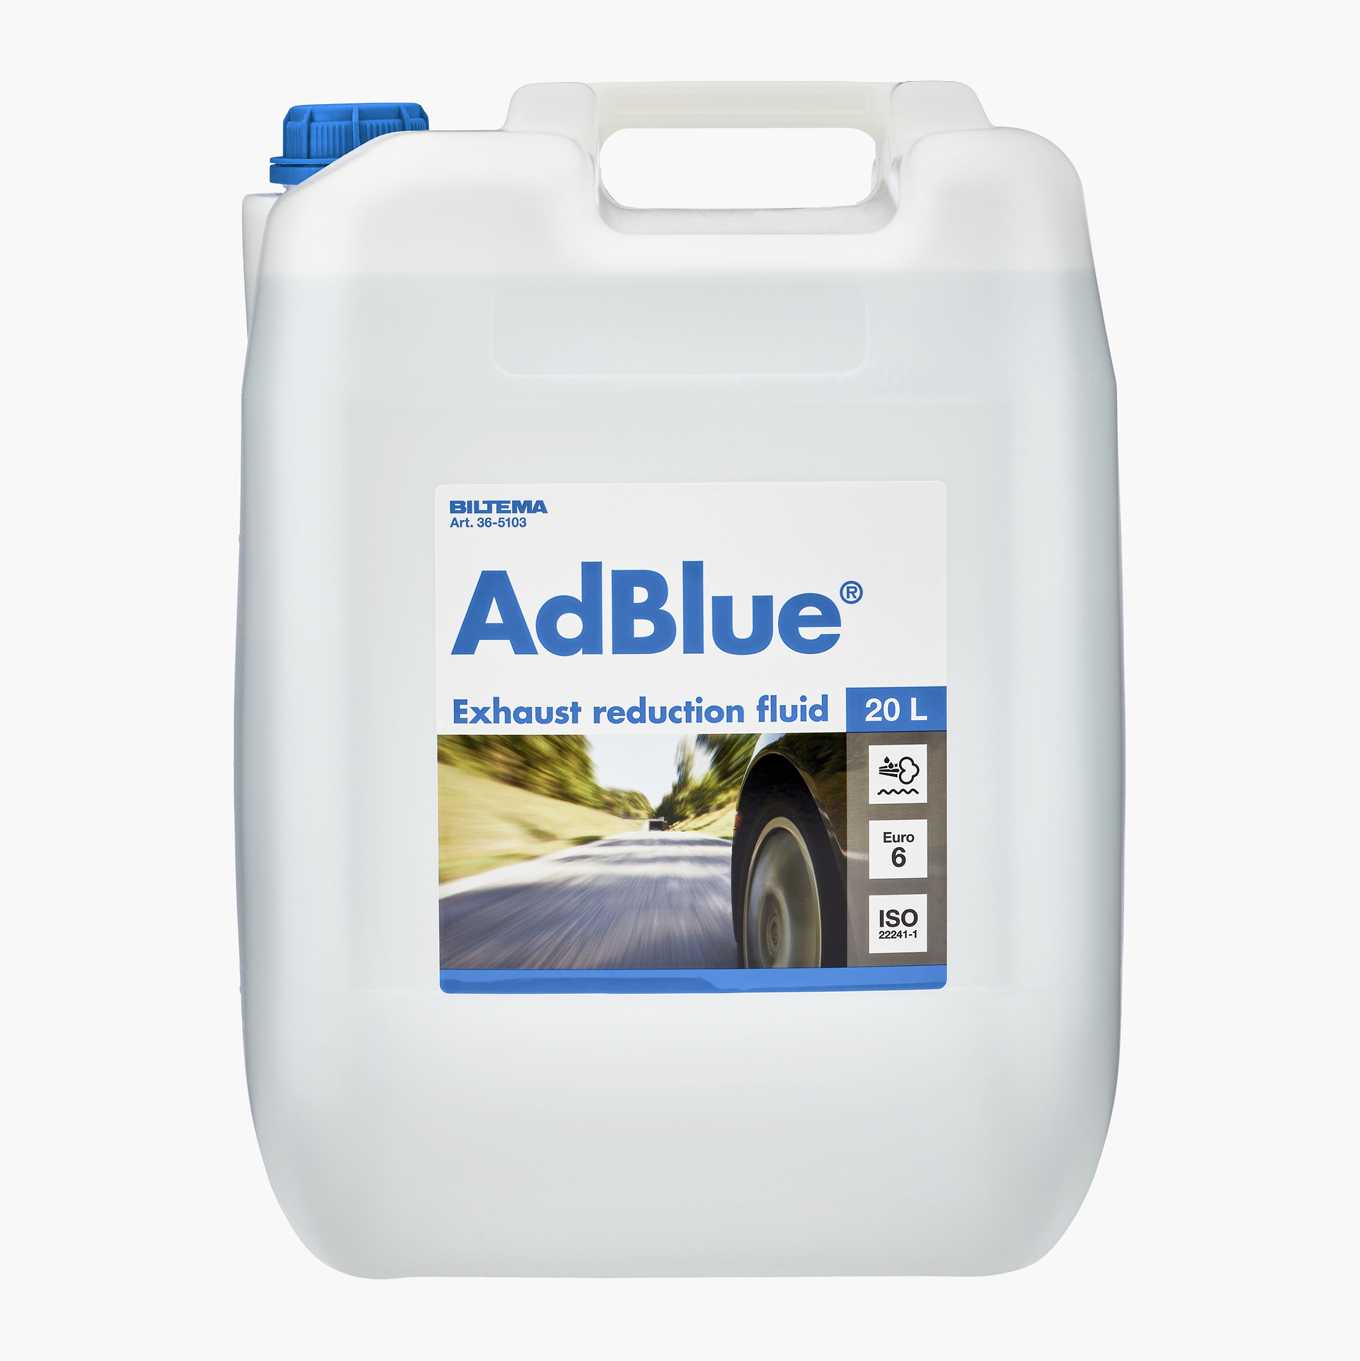 Adblue by Bag Nozzle,Jerrycan Nozzle,HDPE Drum and Bulk Tank Packaging